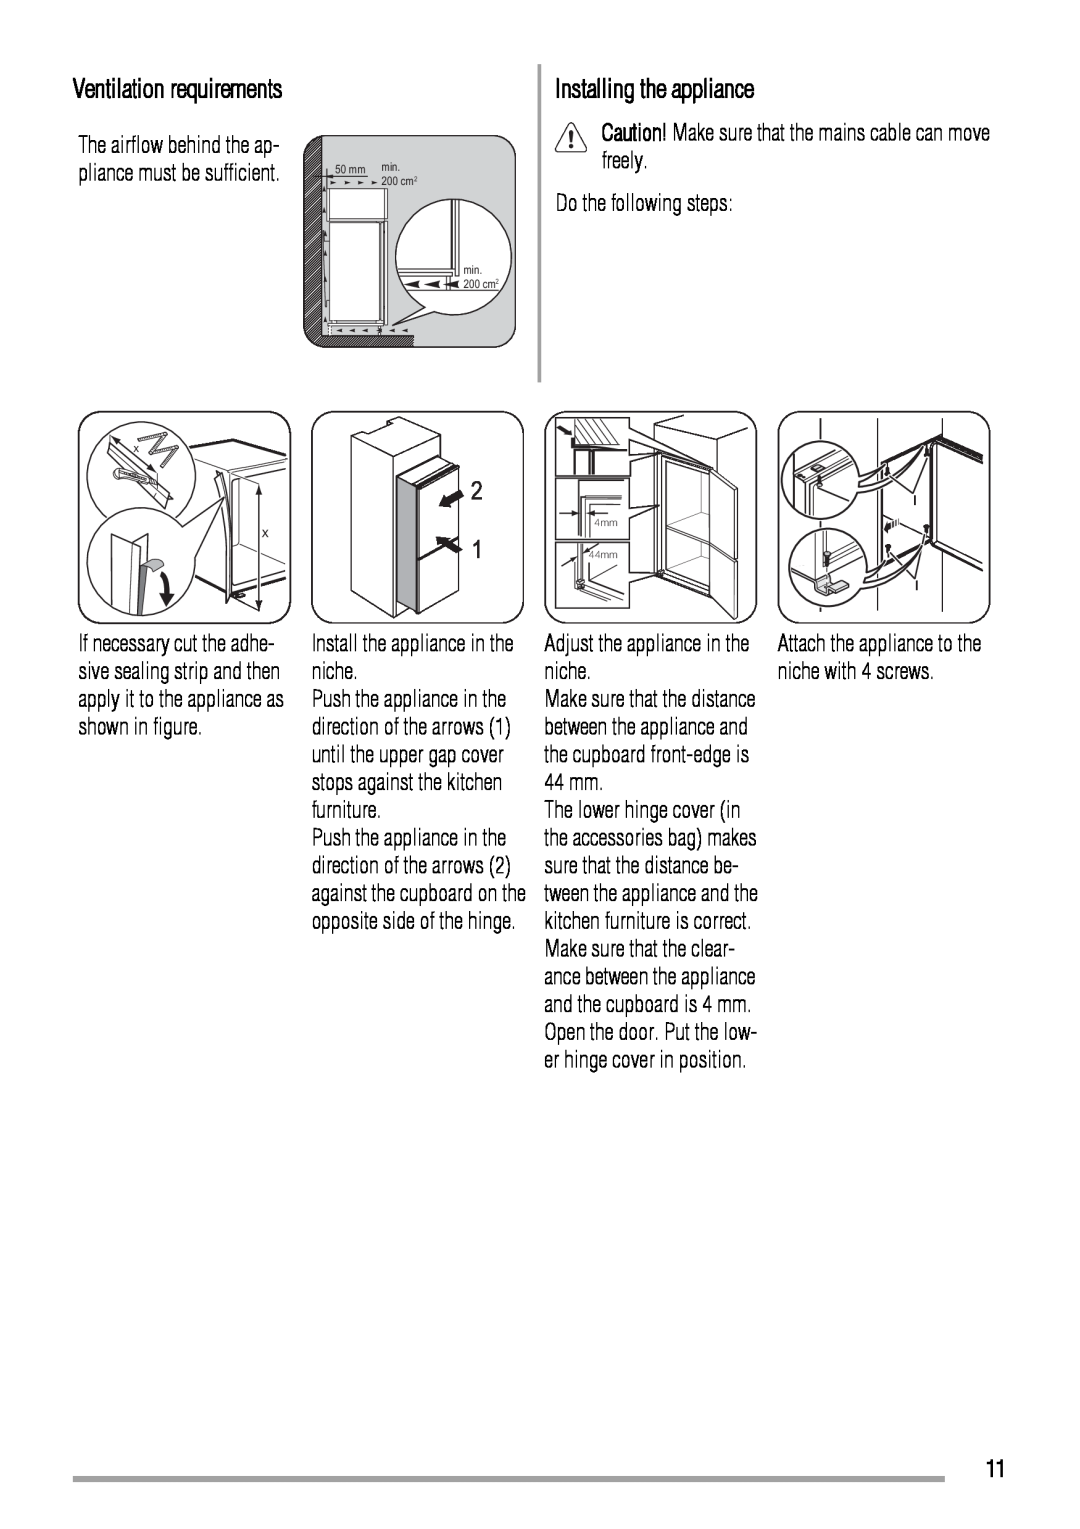 Zanussi ZBB6284 Installing the appliance, Caution! Make sure that the mains cable can move freely, Do the following steps 